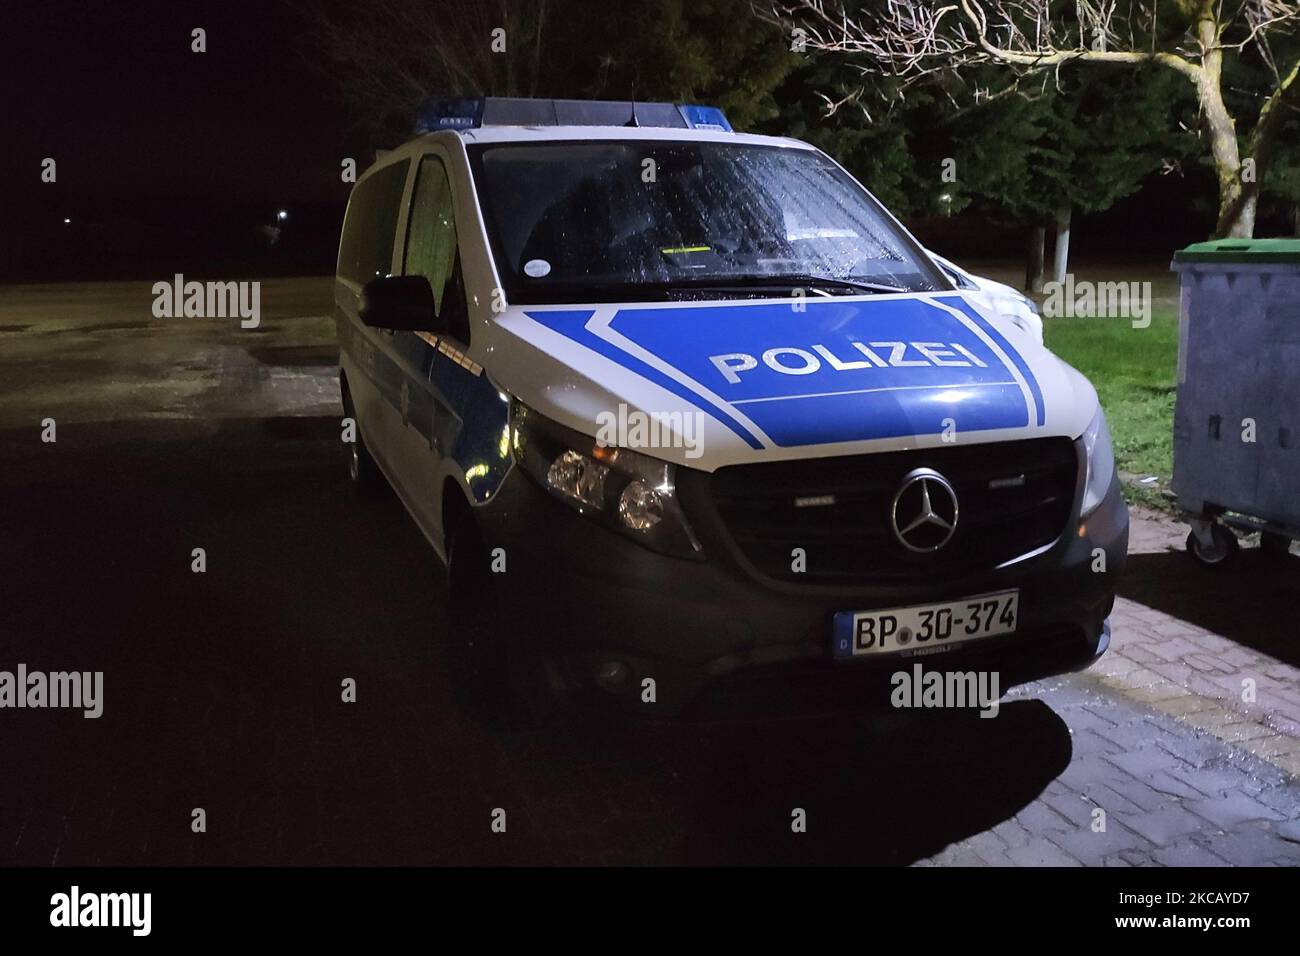 A van from the German police part of the FRONTEX force as seen near the Greek-Turkish borders. The vehicle has the logo of the Federal Police Bundespolizei or BPOL and the inscription POLIZEI. Frontex the European Border and Coast Guard Agency is controlling the external European Schengen borders assisting national law enforcement to the member state countries. Operation Poseidon - Poseidon Rapid Intervention oversees the southeastern land border of the EU with Turkey on Evros river (Maritsa or Meriç). The operation was reinforced in March 2020, during the border crisis when Turkey allowed tho Stock Photo